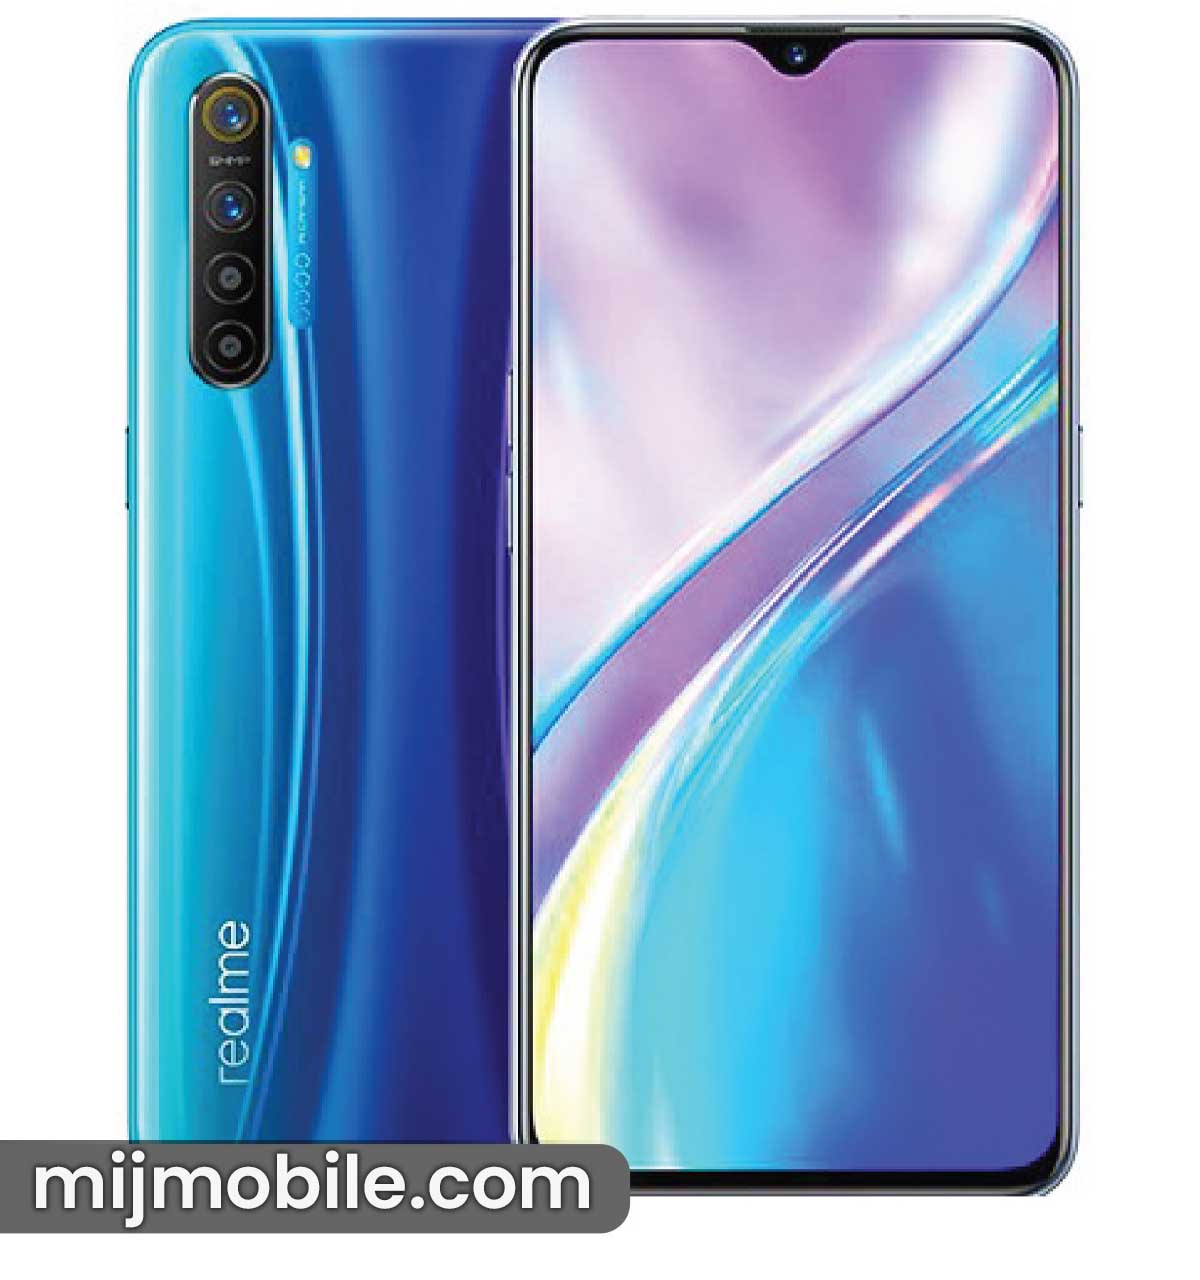 Realme XT Price in Pakistan & Specifications Realme XT Price in Pakistan is only 47,000.